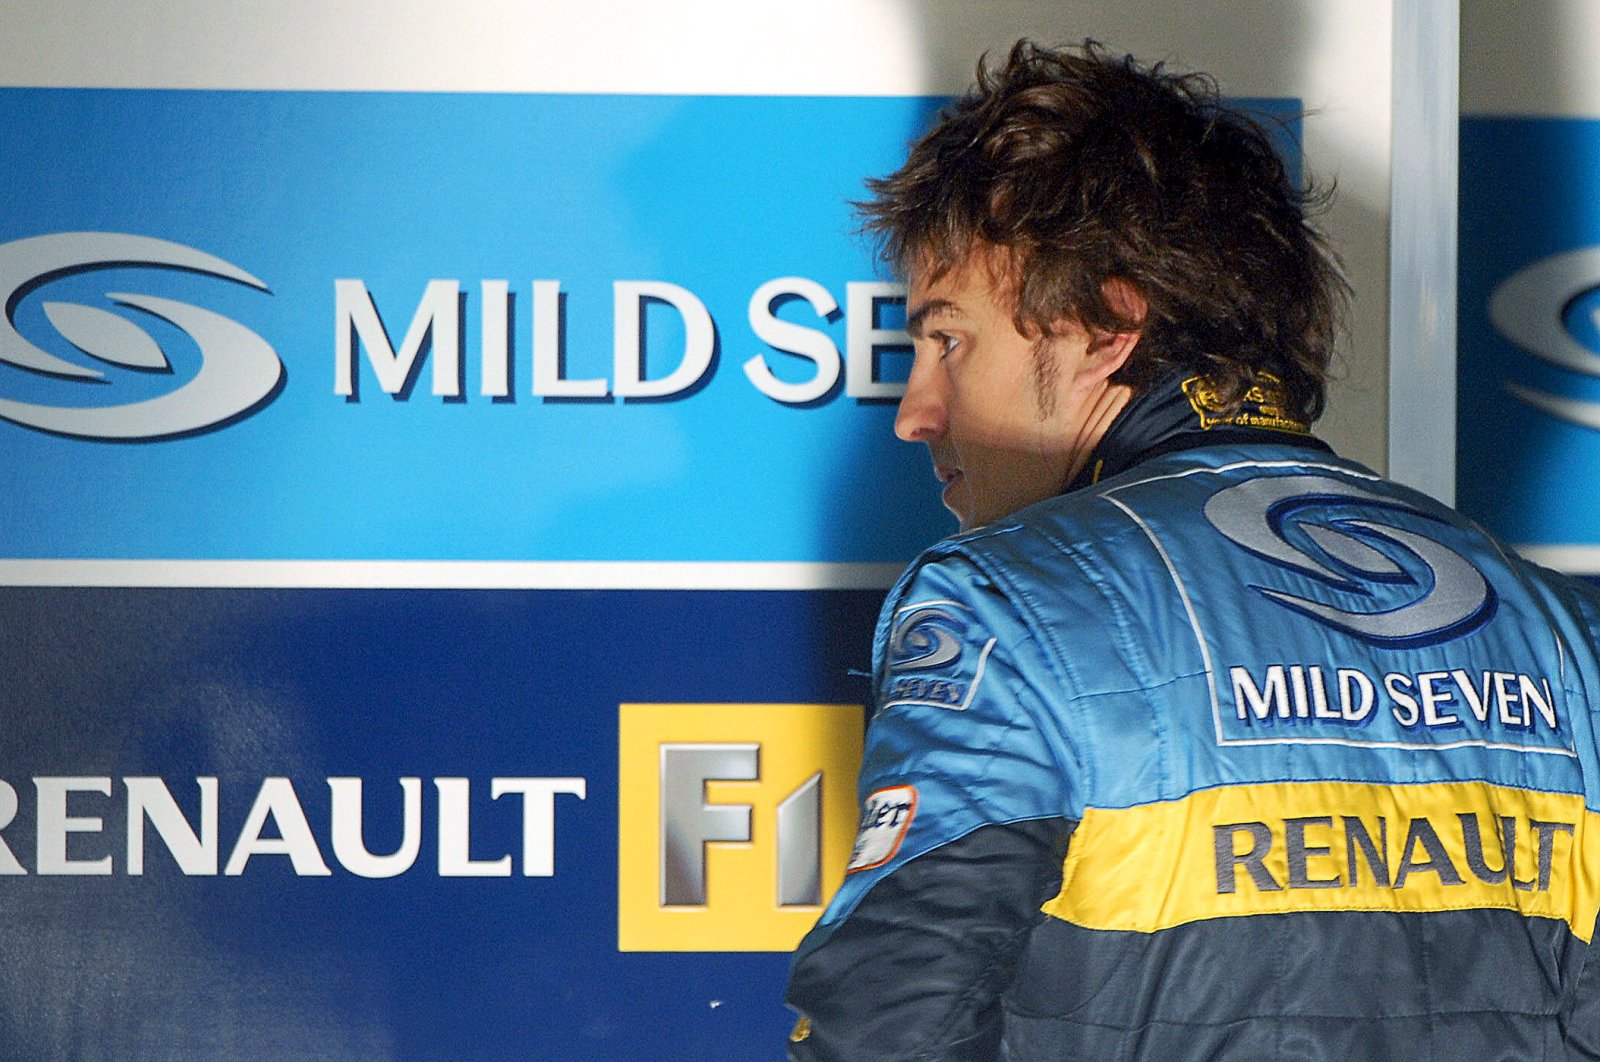 Fernando Alonso during an F1 free training session in Cadiz, Spain, July 21, 2006. (EPA Photo)